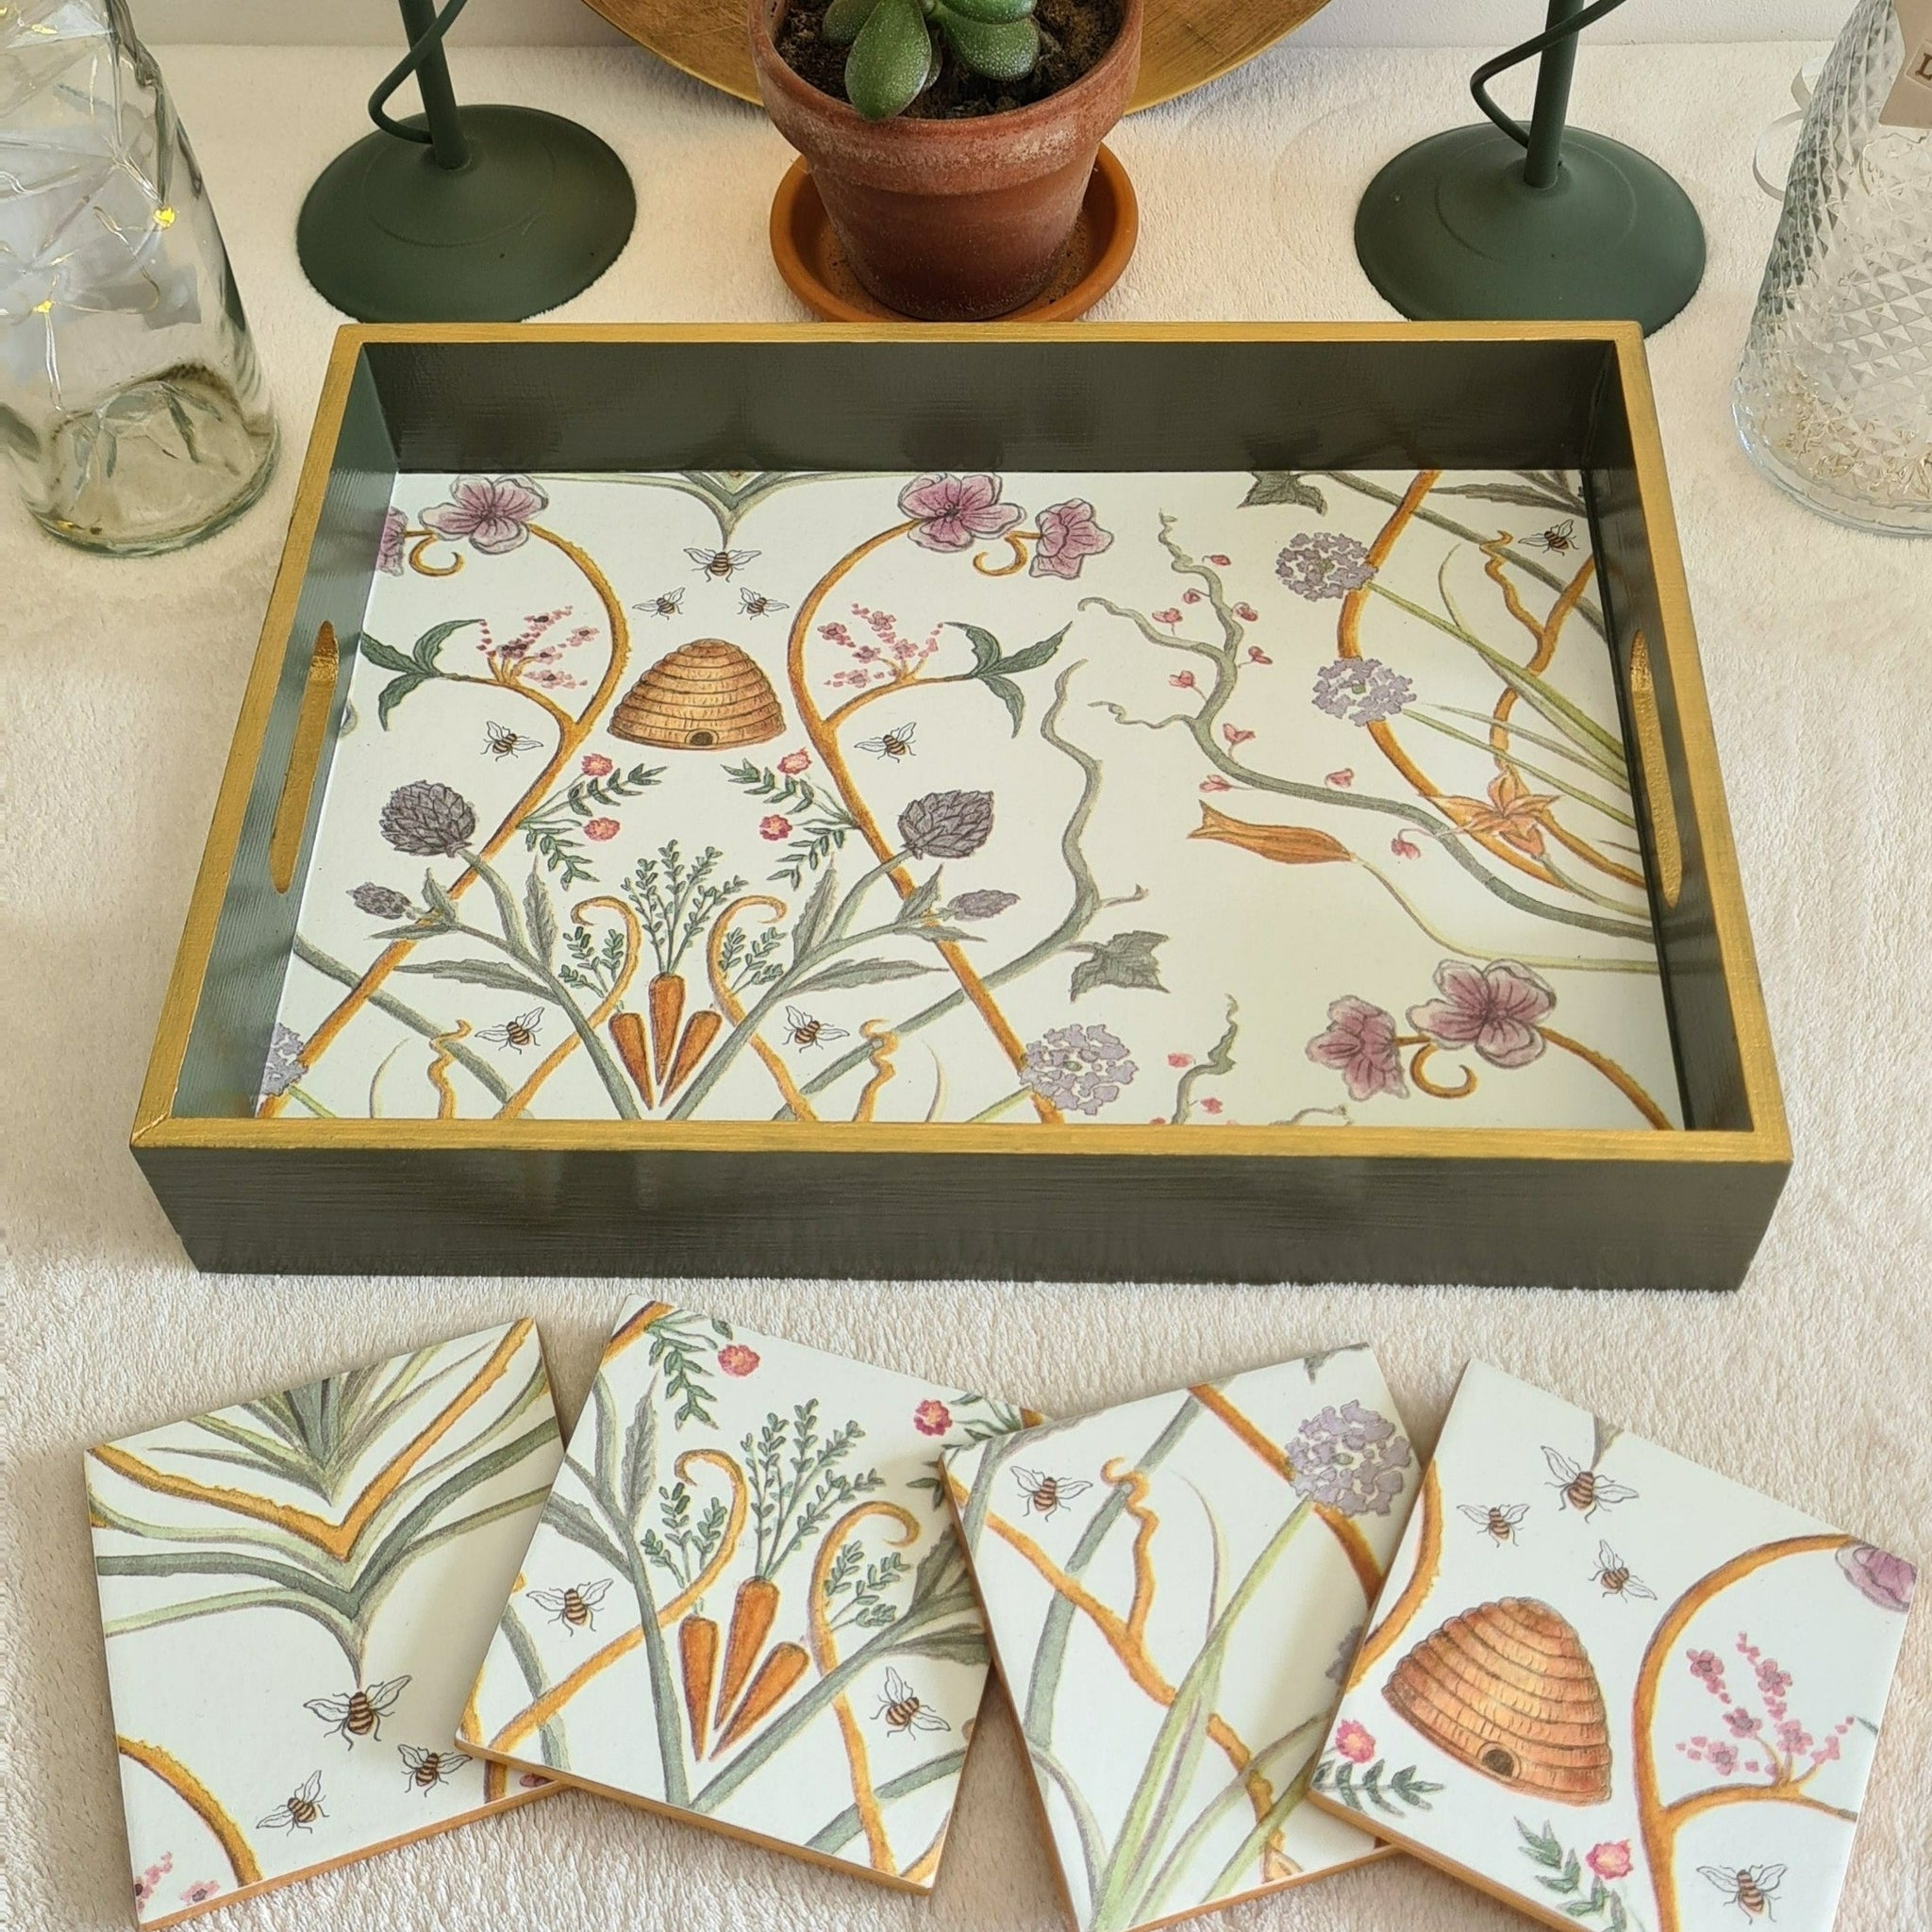 Beautifully decoupaged serving tray.  Painted deep green with gold edging, decoupaged in Angel Strawbridge's Potagerie wallpaper from her Escape To The Chateau range.  Handmade by Shel's Shabby Chic in Stotfold.